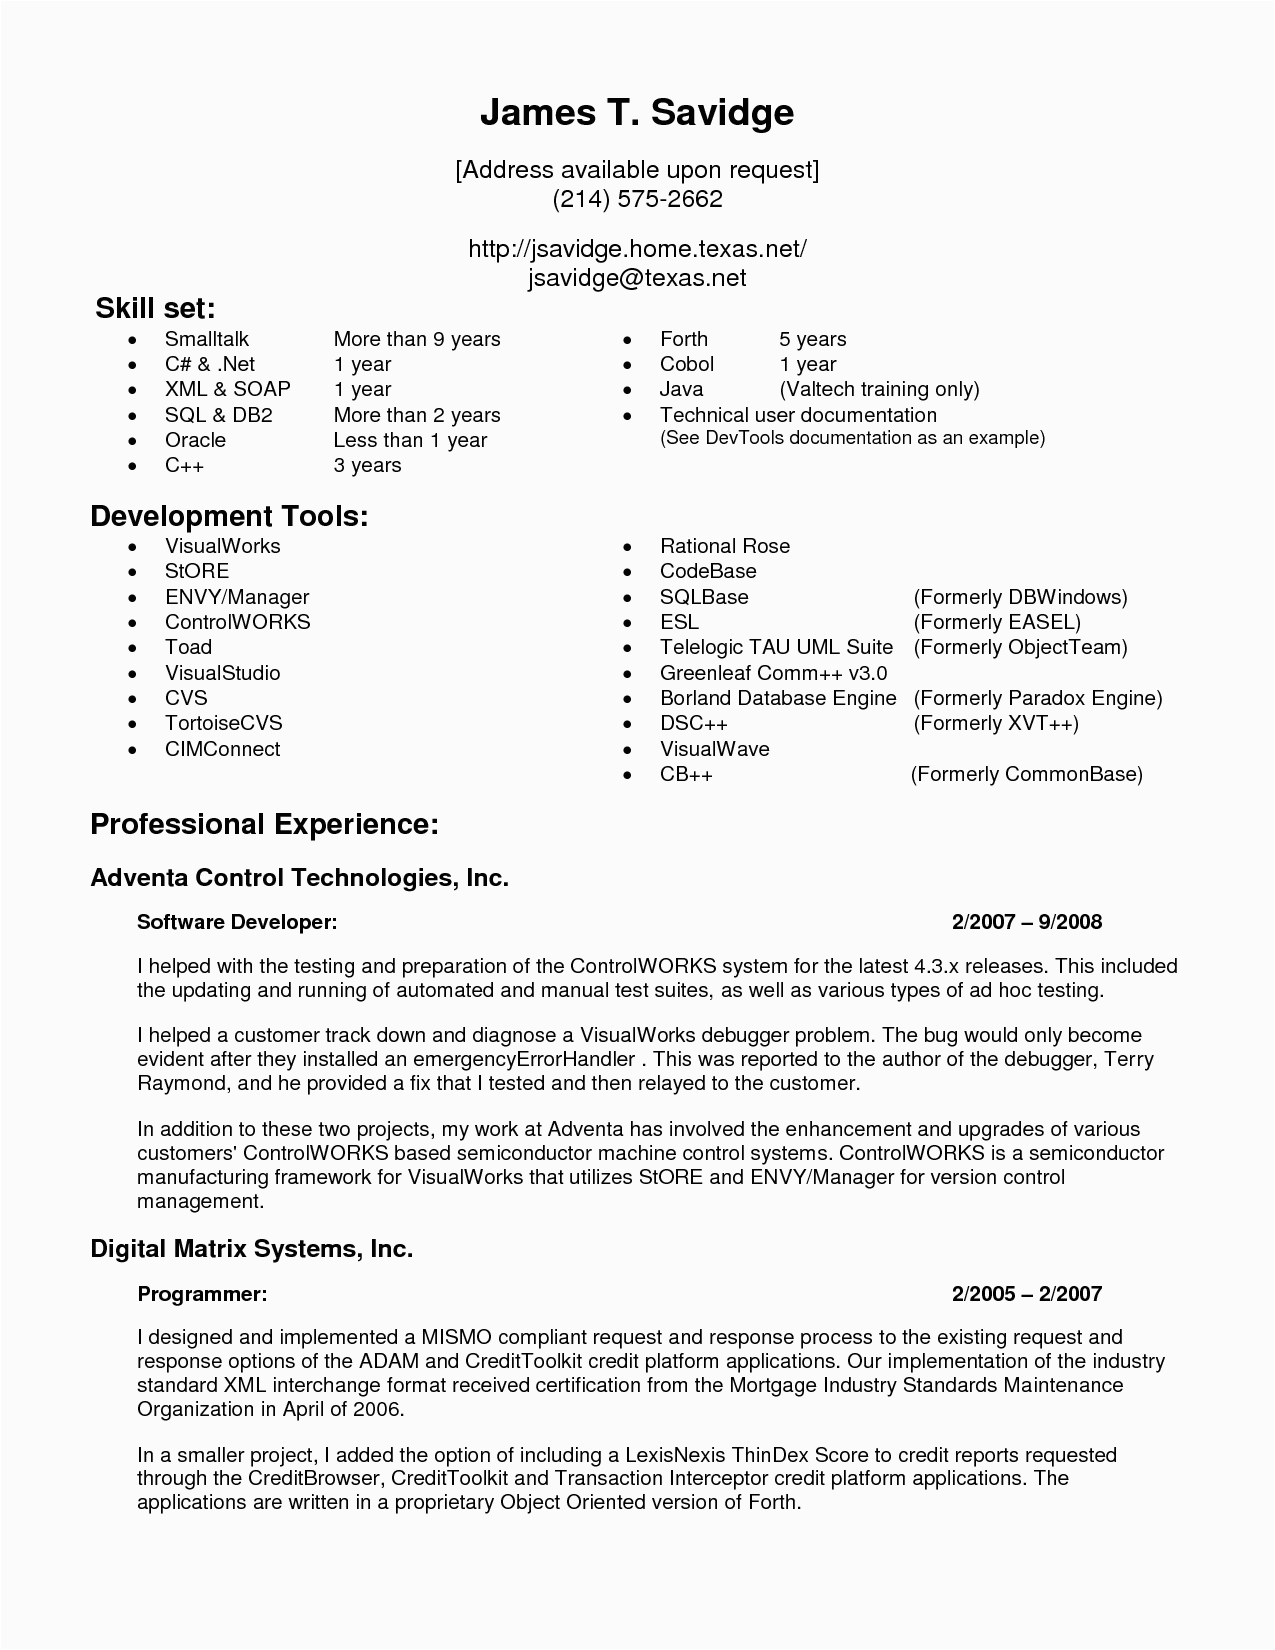 Testing Resume Sample for 1 Year Experience top Rated Manual Testing Resume Sample for 1 Year